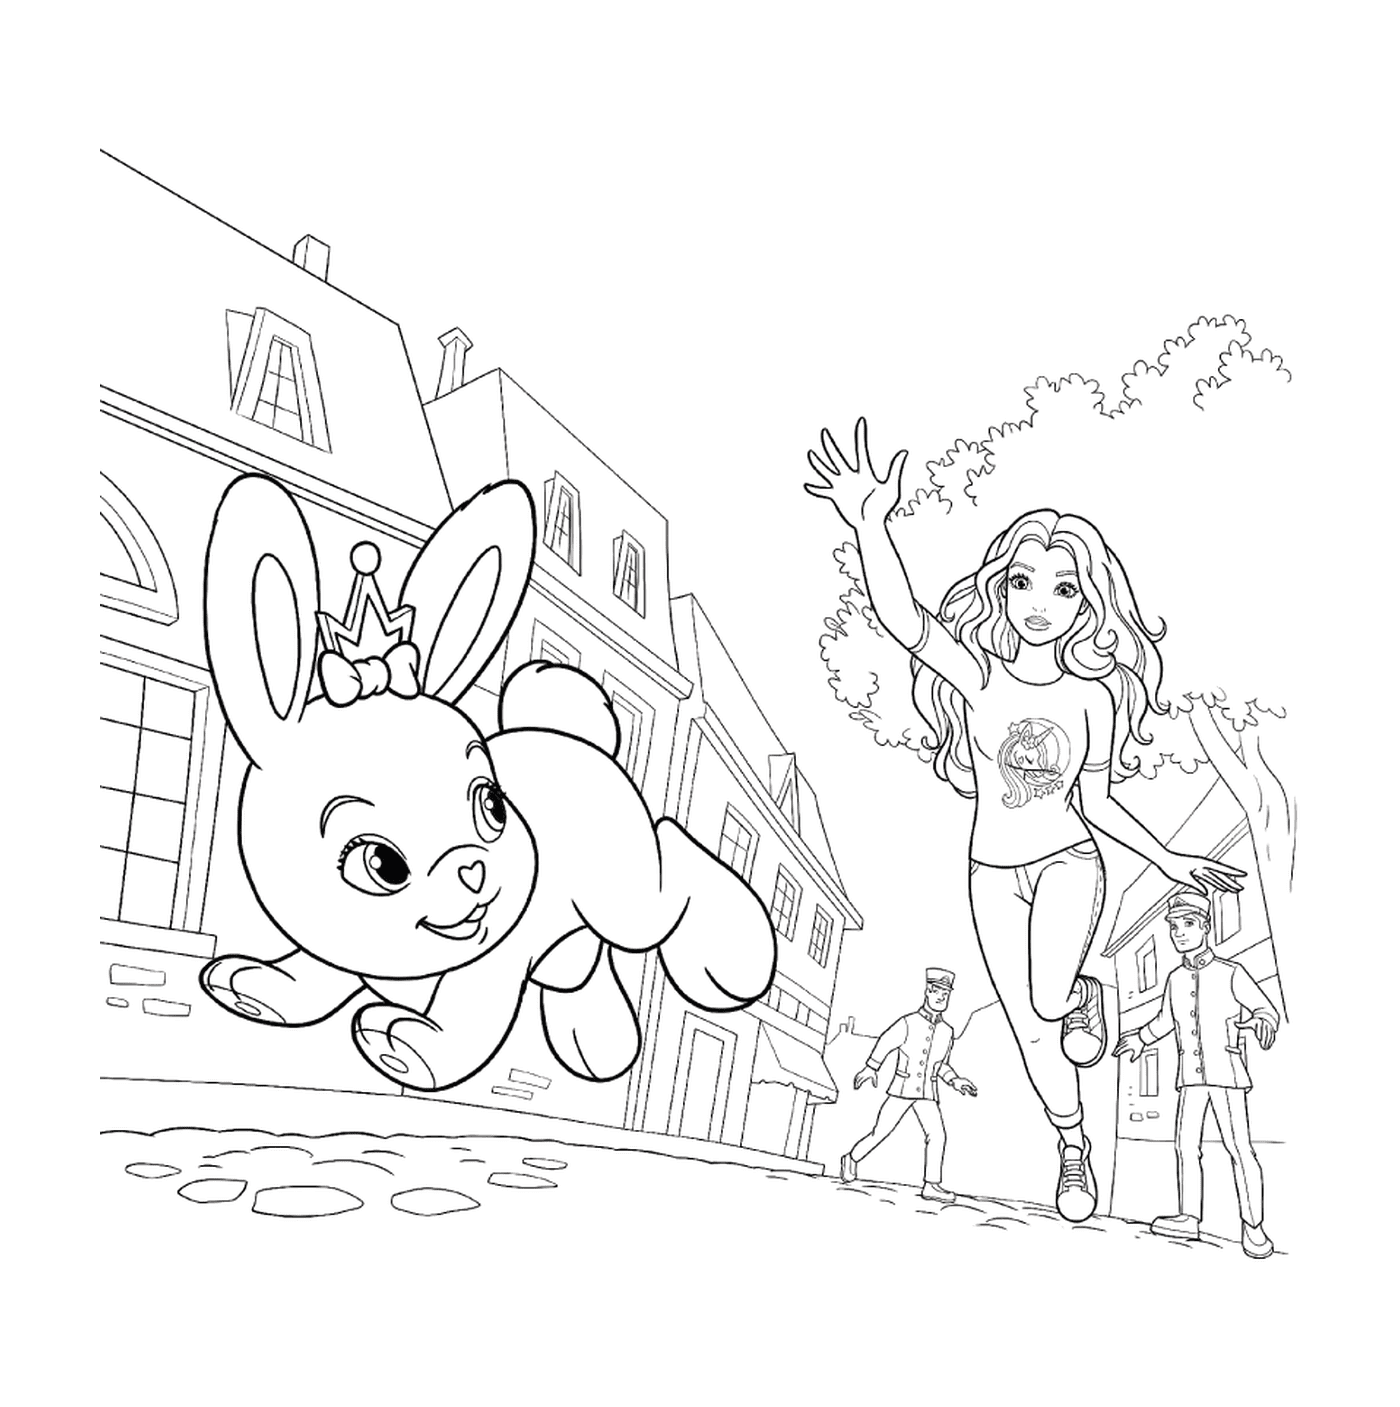  A girl running with a rabbit 